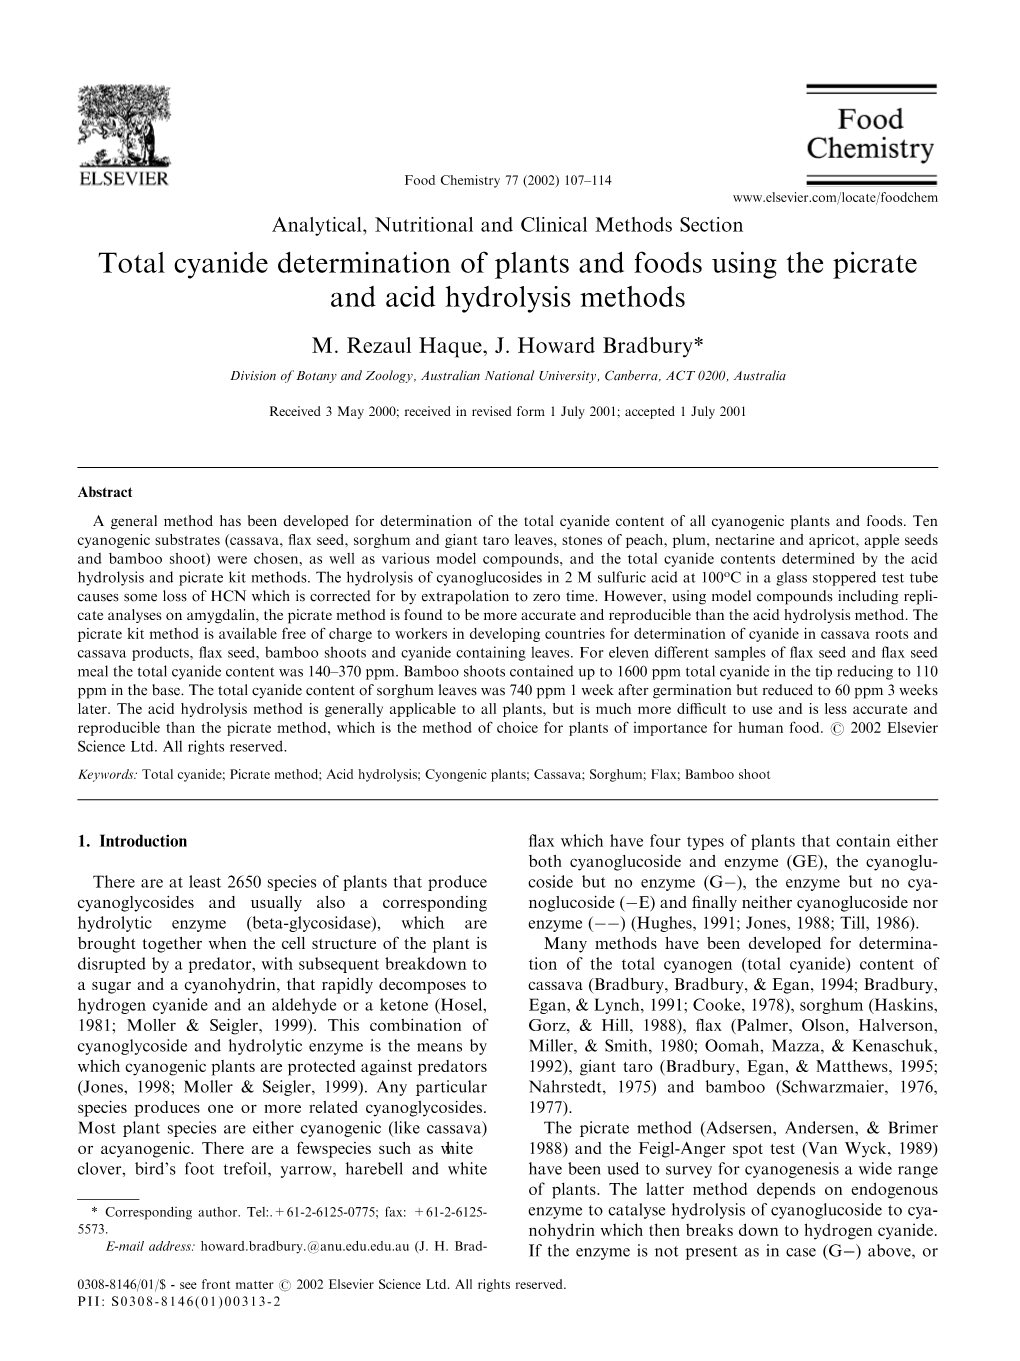 Total Cyanide Determination of Plants and Foods Using the Picrate and Acid Hydrolysis Methods